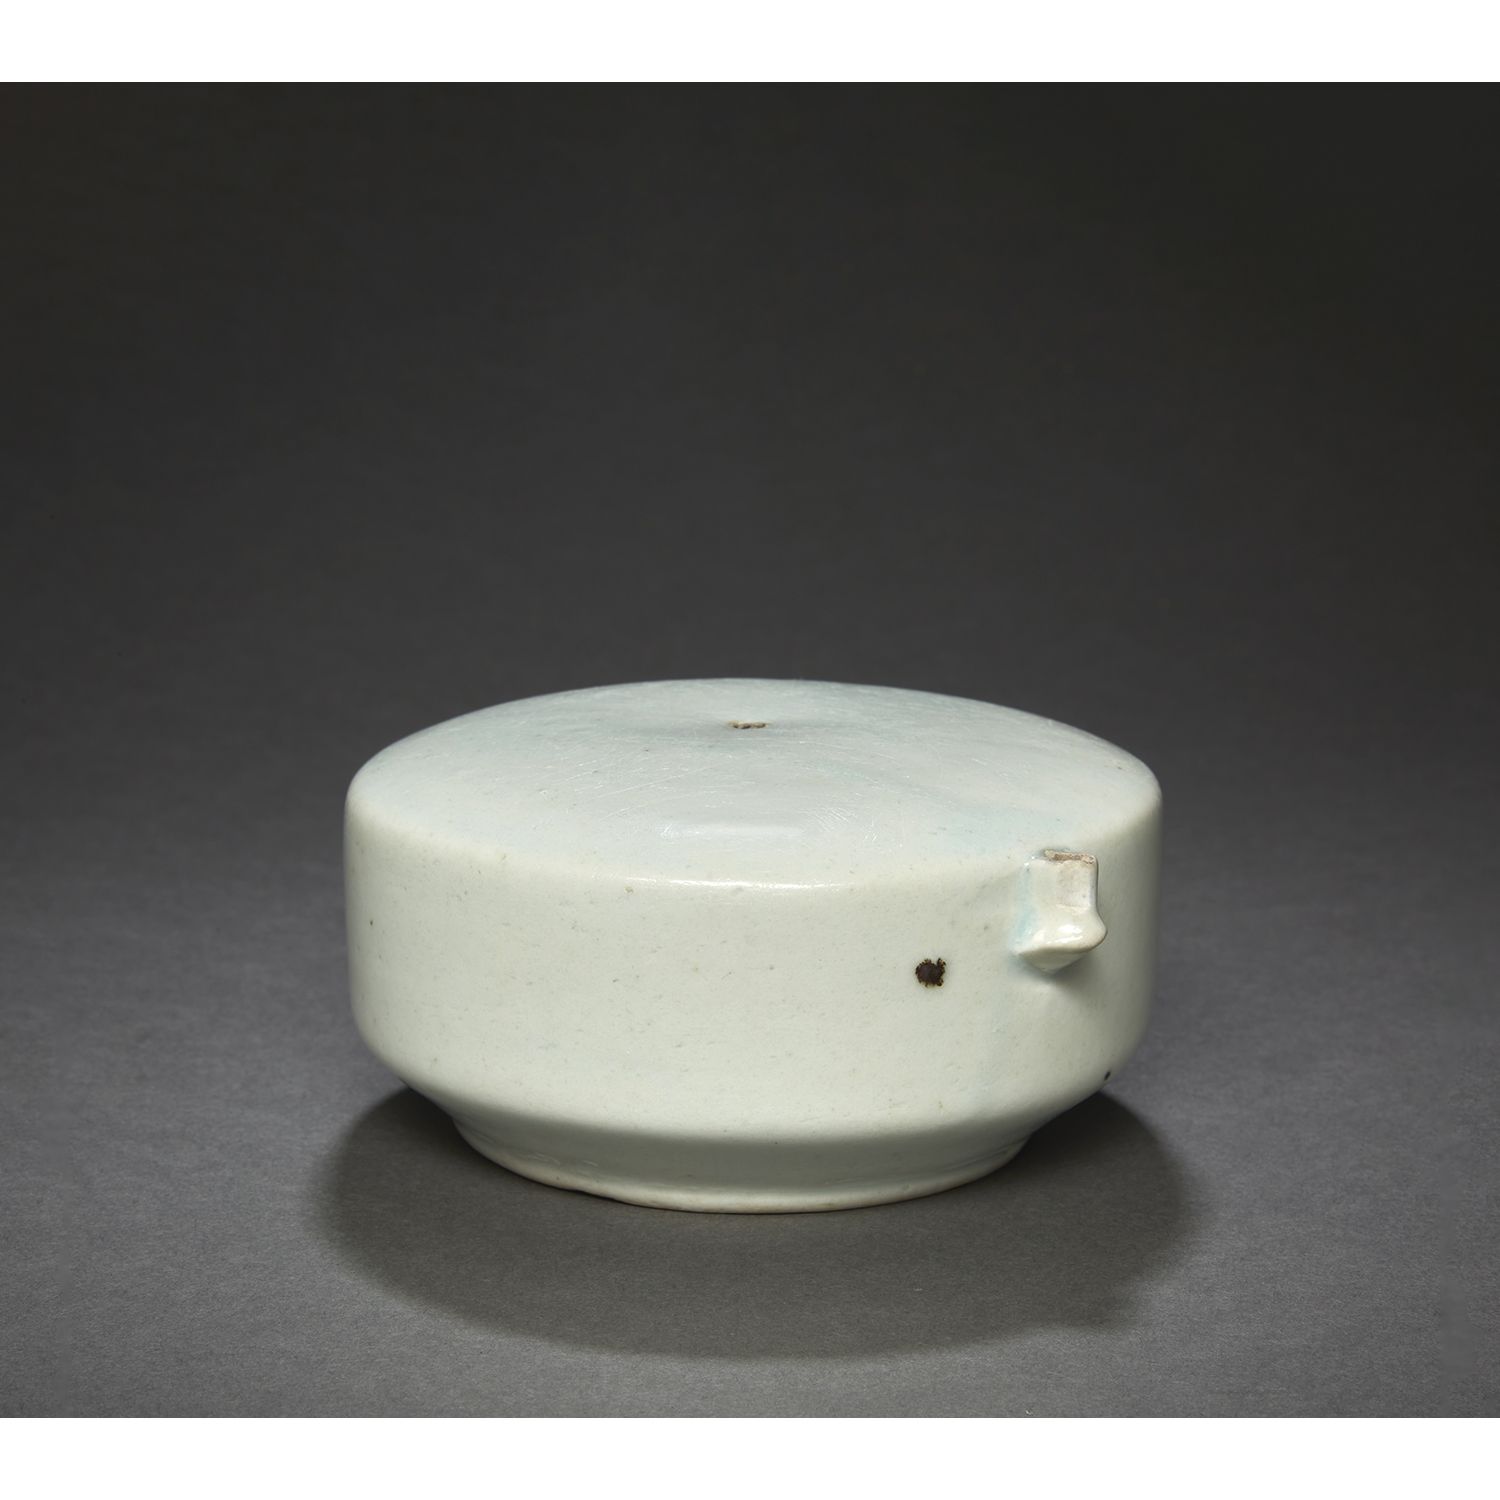 Null DROP COUNTER
in white enameled porcelain, of circular form. With an old Spi&hellip;